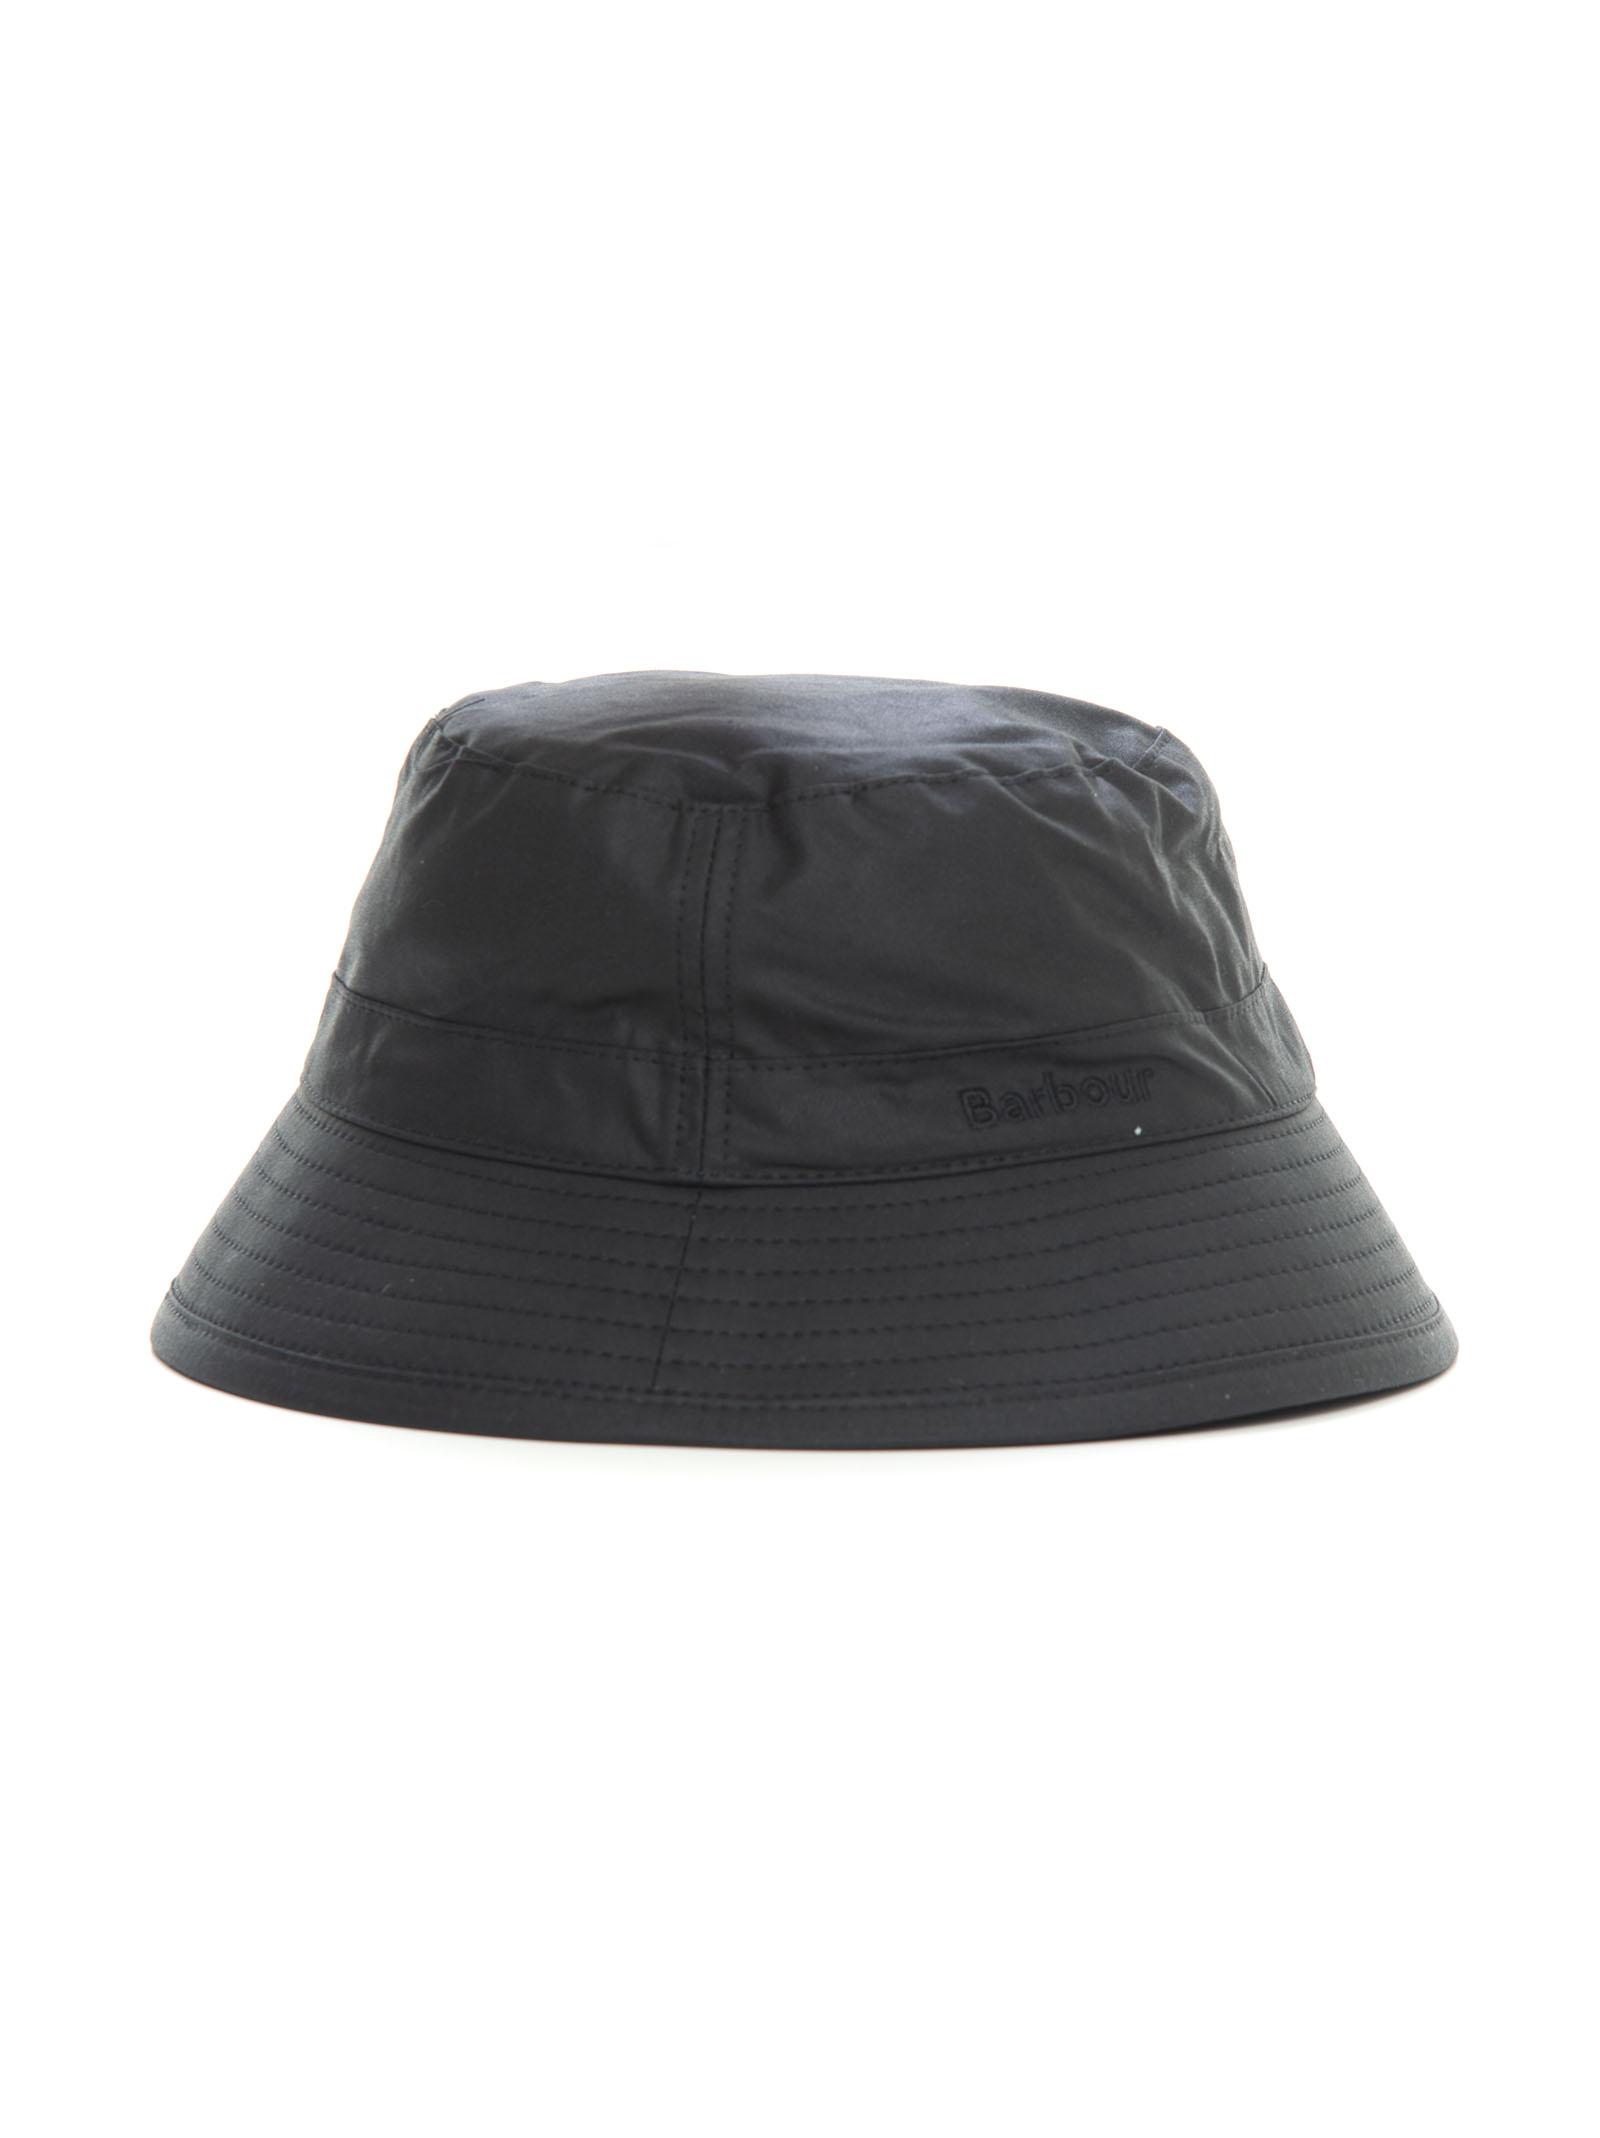 Barbour Wax Sports Bucket Hat in Khaki,Green (Black) for Men - Save 25% |  Lyst